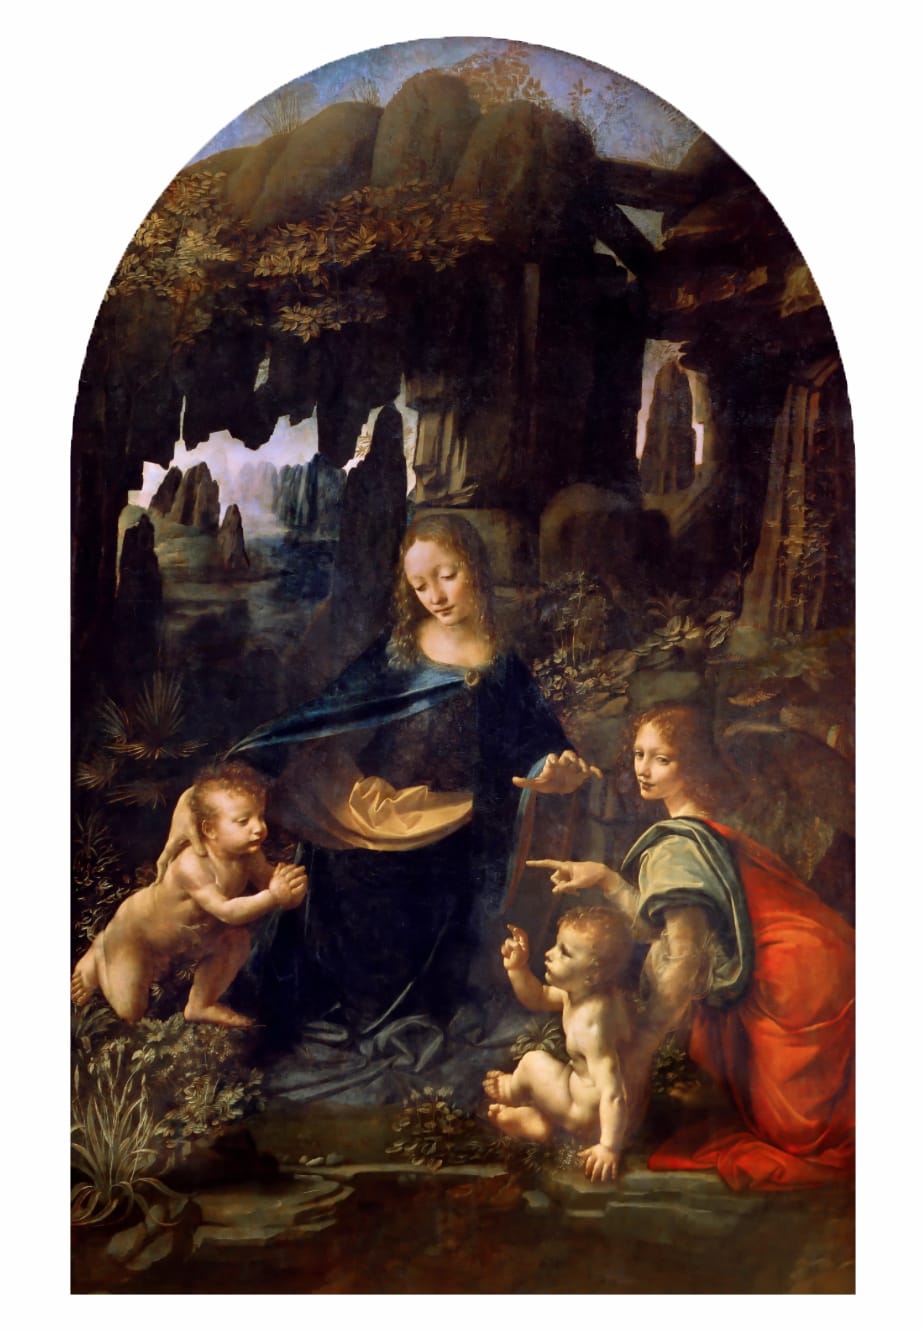 The Archetypal image of the Madonna on the Rocks expresses the gentle warmth of the Feminine Principle, welcoming the child in early life, bringing comfort even when circumstances and environment are harsh and unfavorable.